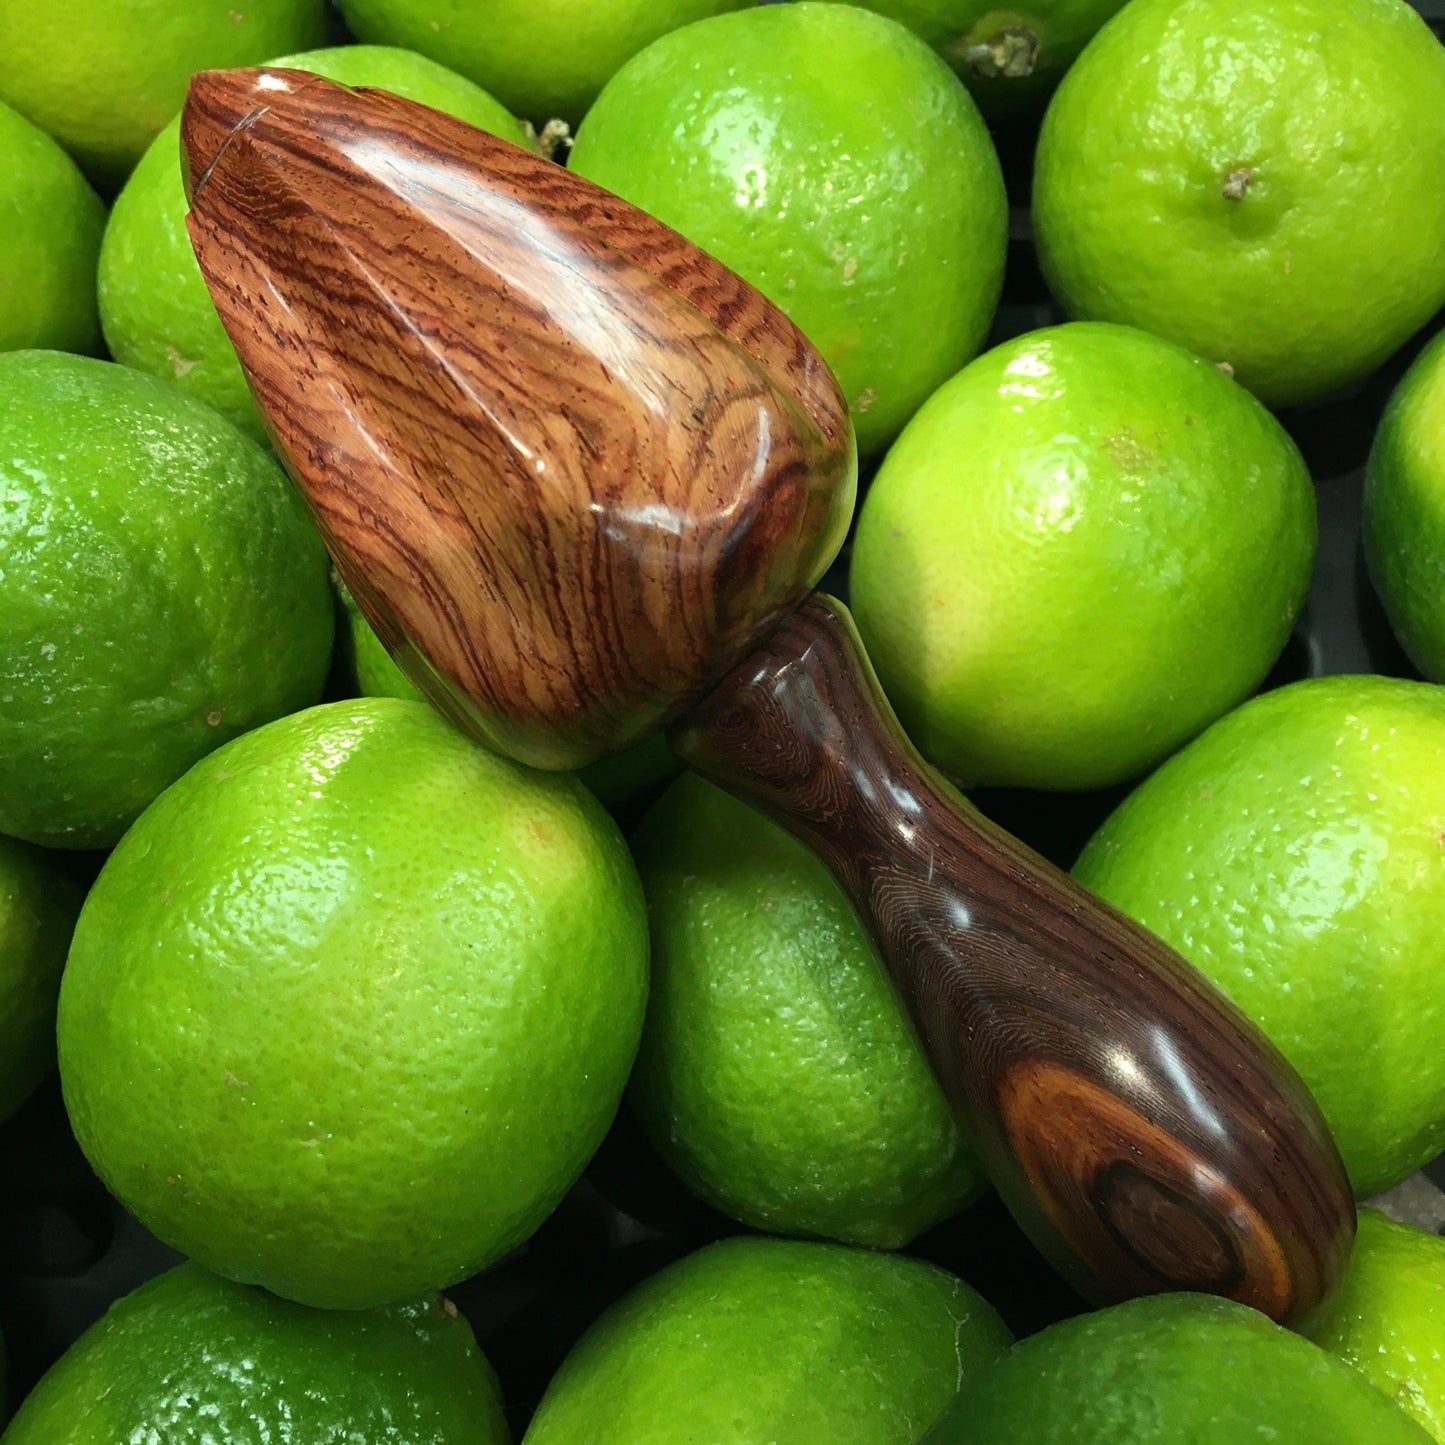 A rosewood citrus reamer sitting on a pile of limes